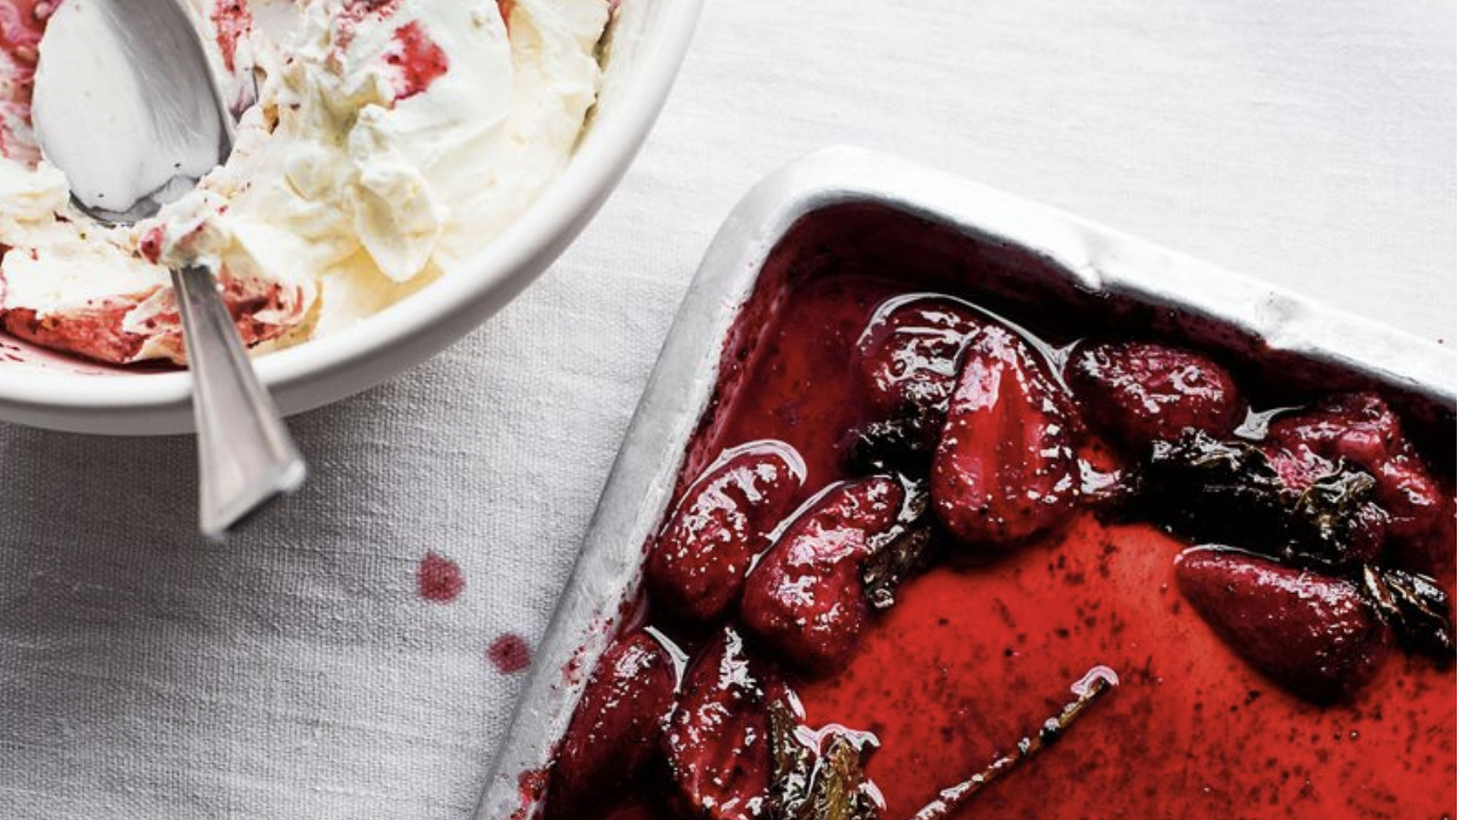 Yotam Ottolenghi’s Sumac Roasted Strawberries with Yogurt Cream recipe is featured in “Ottolenghi Simple.”